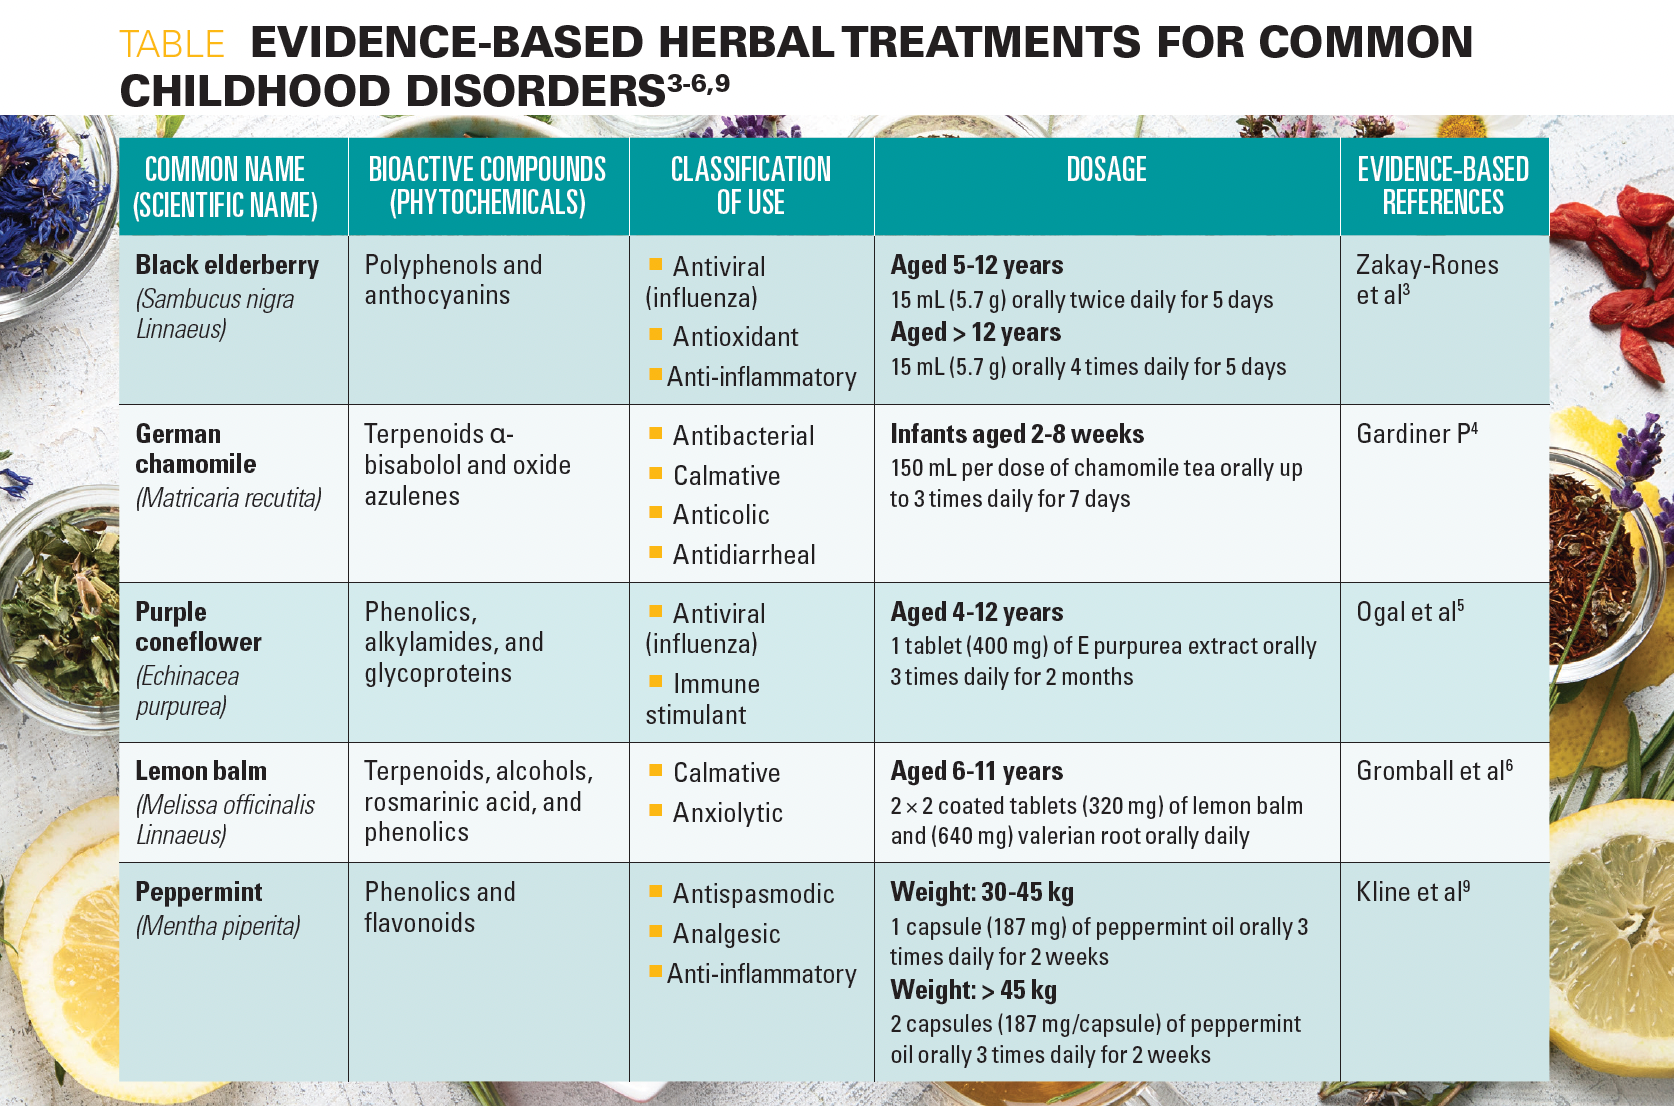 Table. Evidence-Based Herbal Treatments for Common Childhood Disorders3-6,9